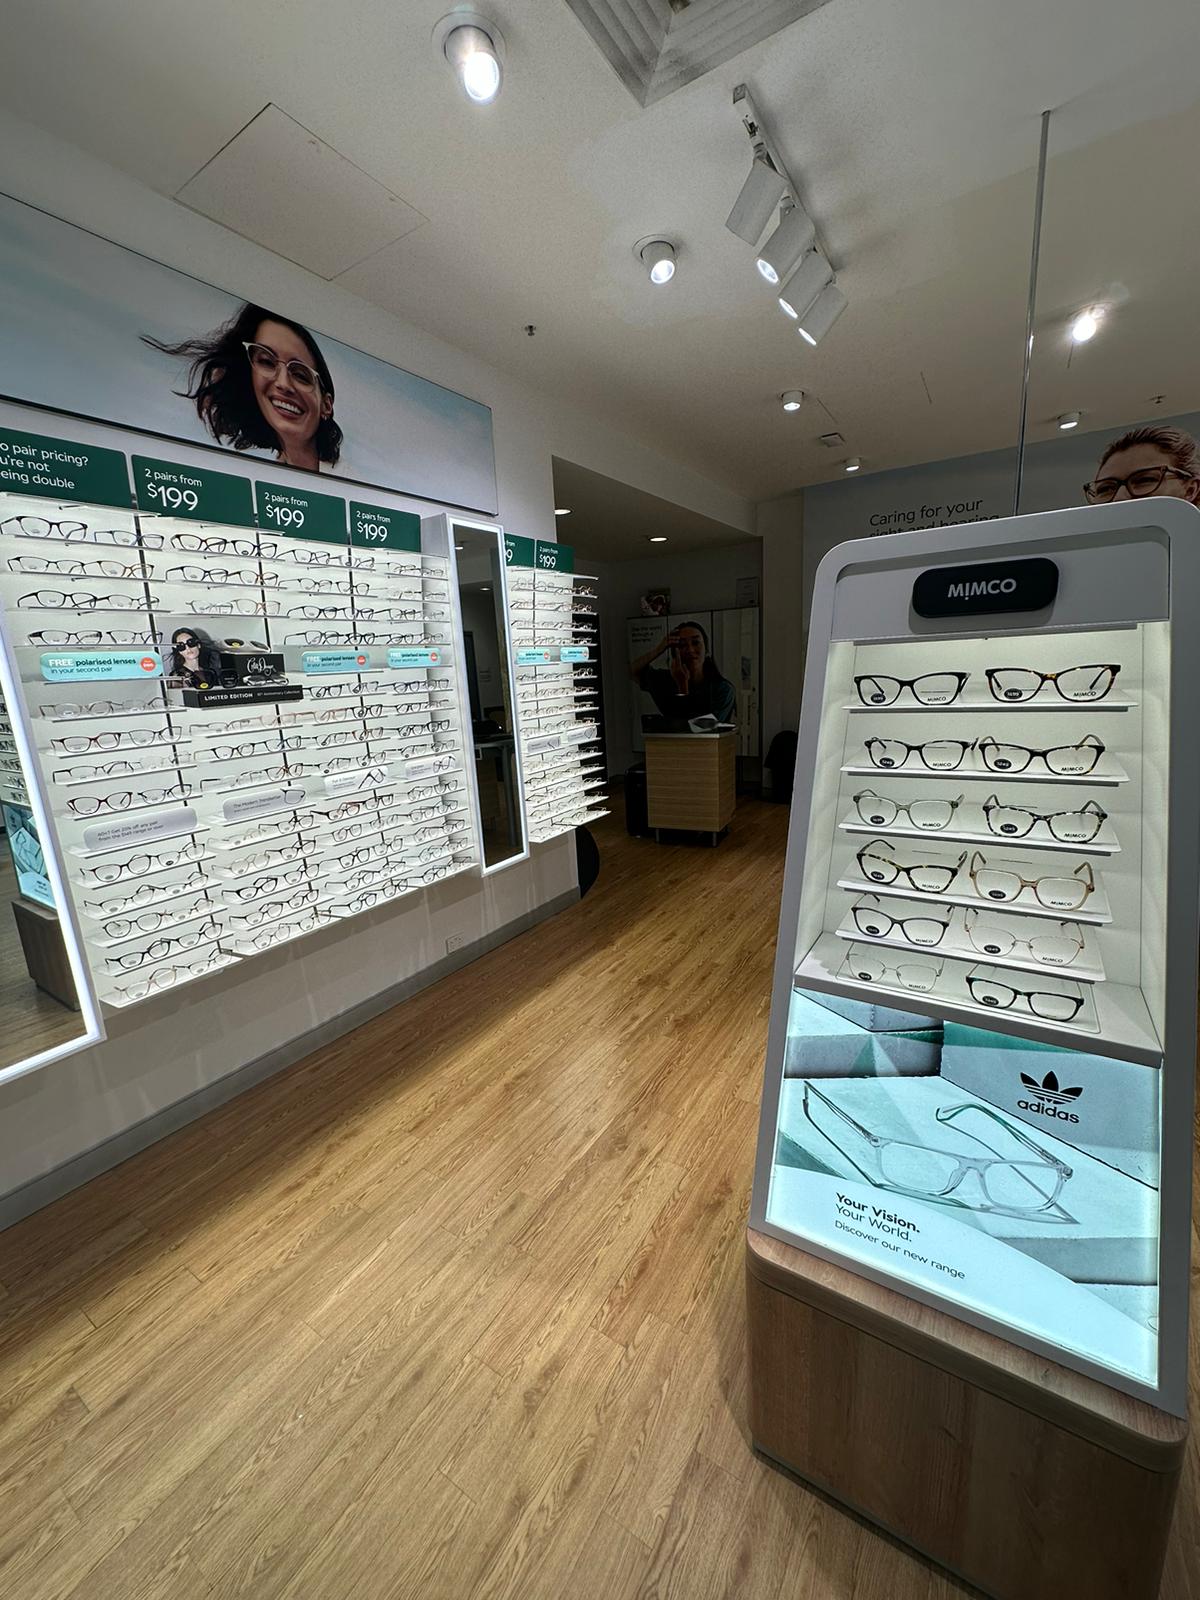 Images Specsavers Optometrists & Audiology - Eastgardens Westfield